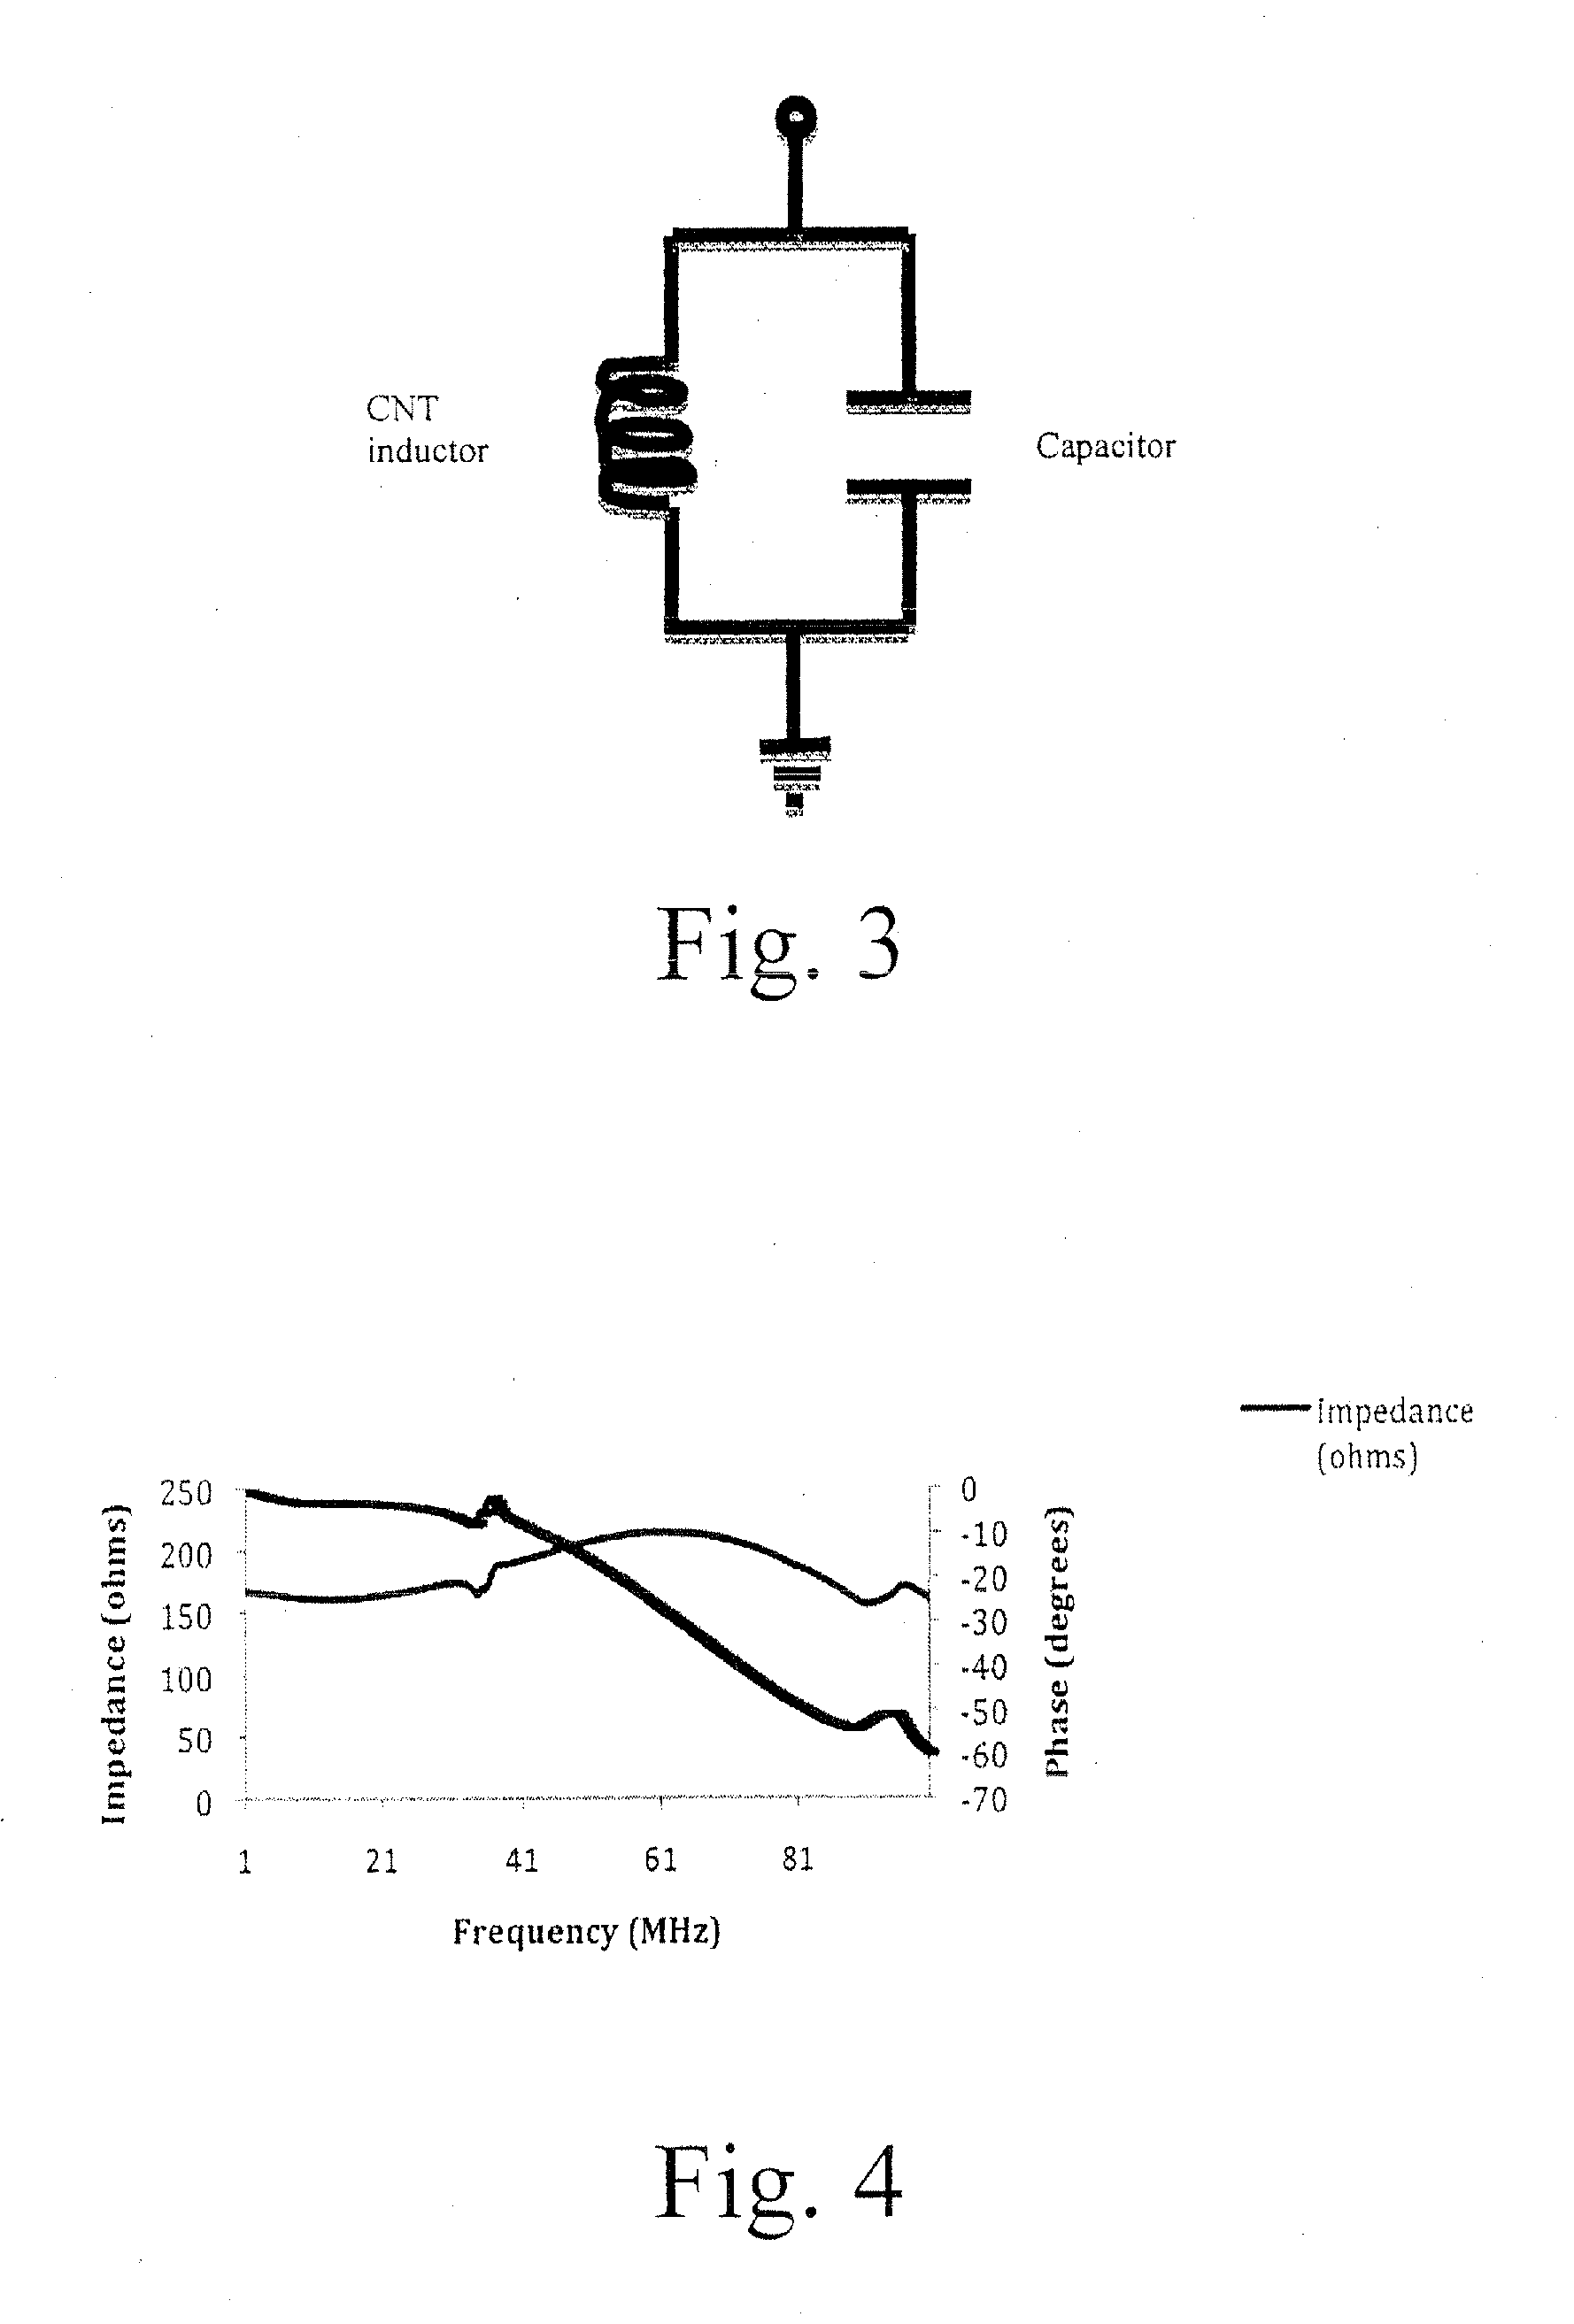 All-organic inductor-capacitor tank circuit for radio frequency sensor applications